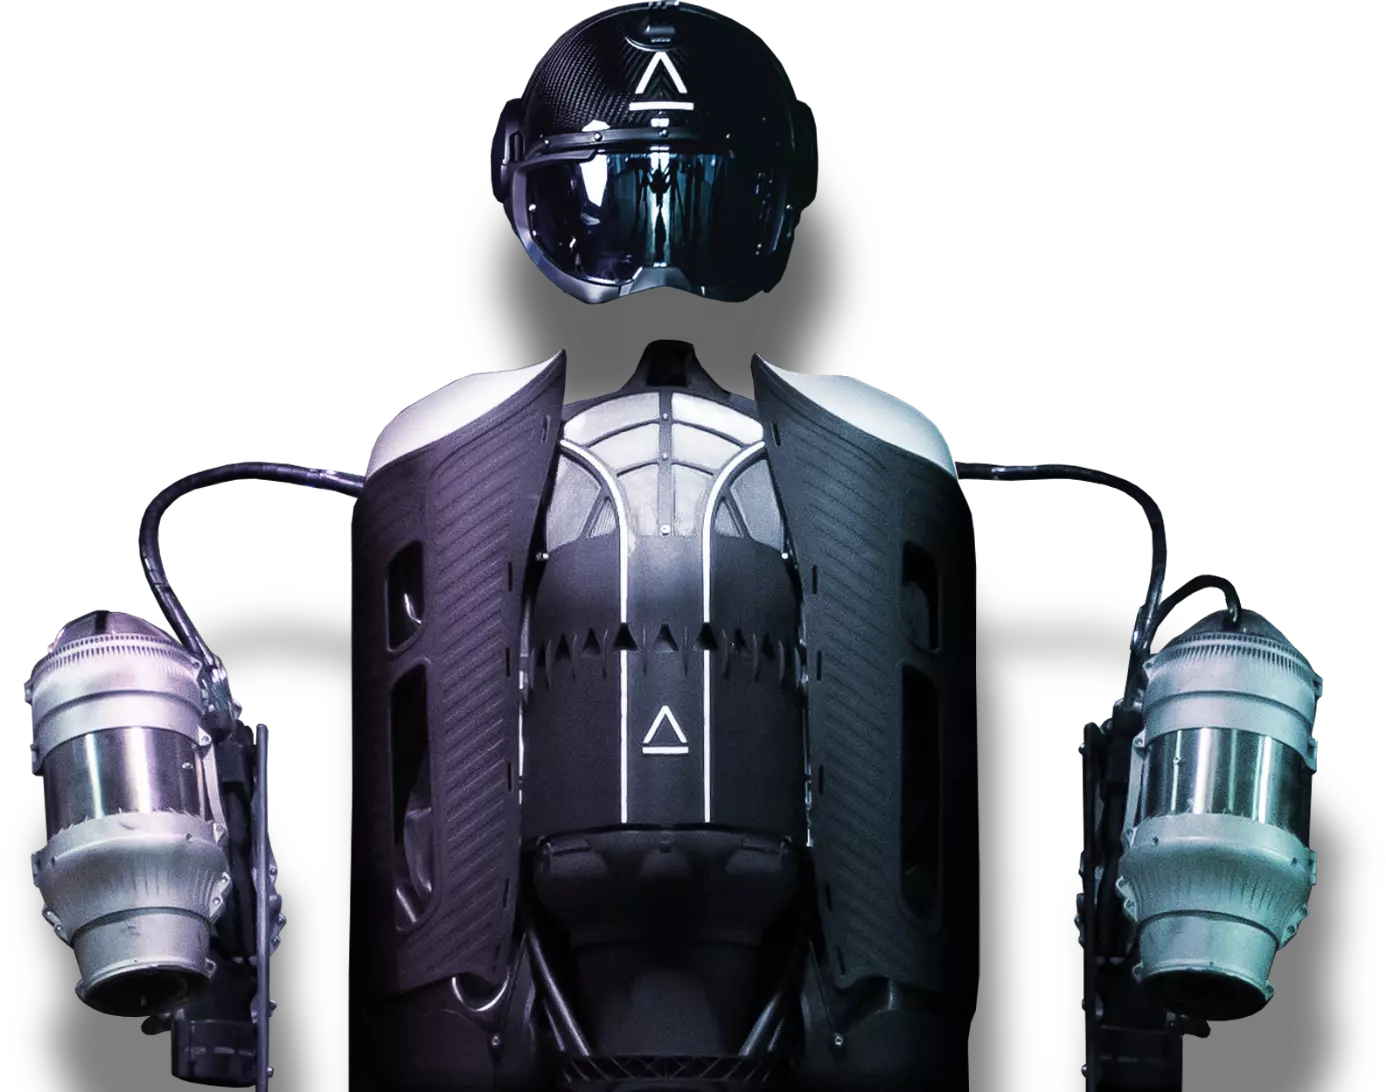 Will jet packs make the dream of personal flight come true?